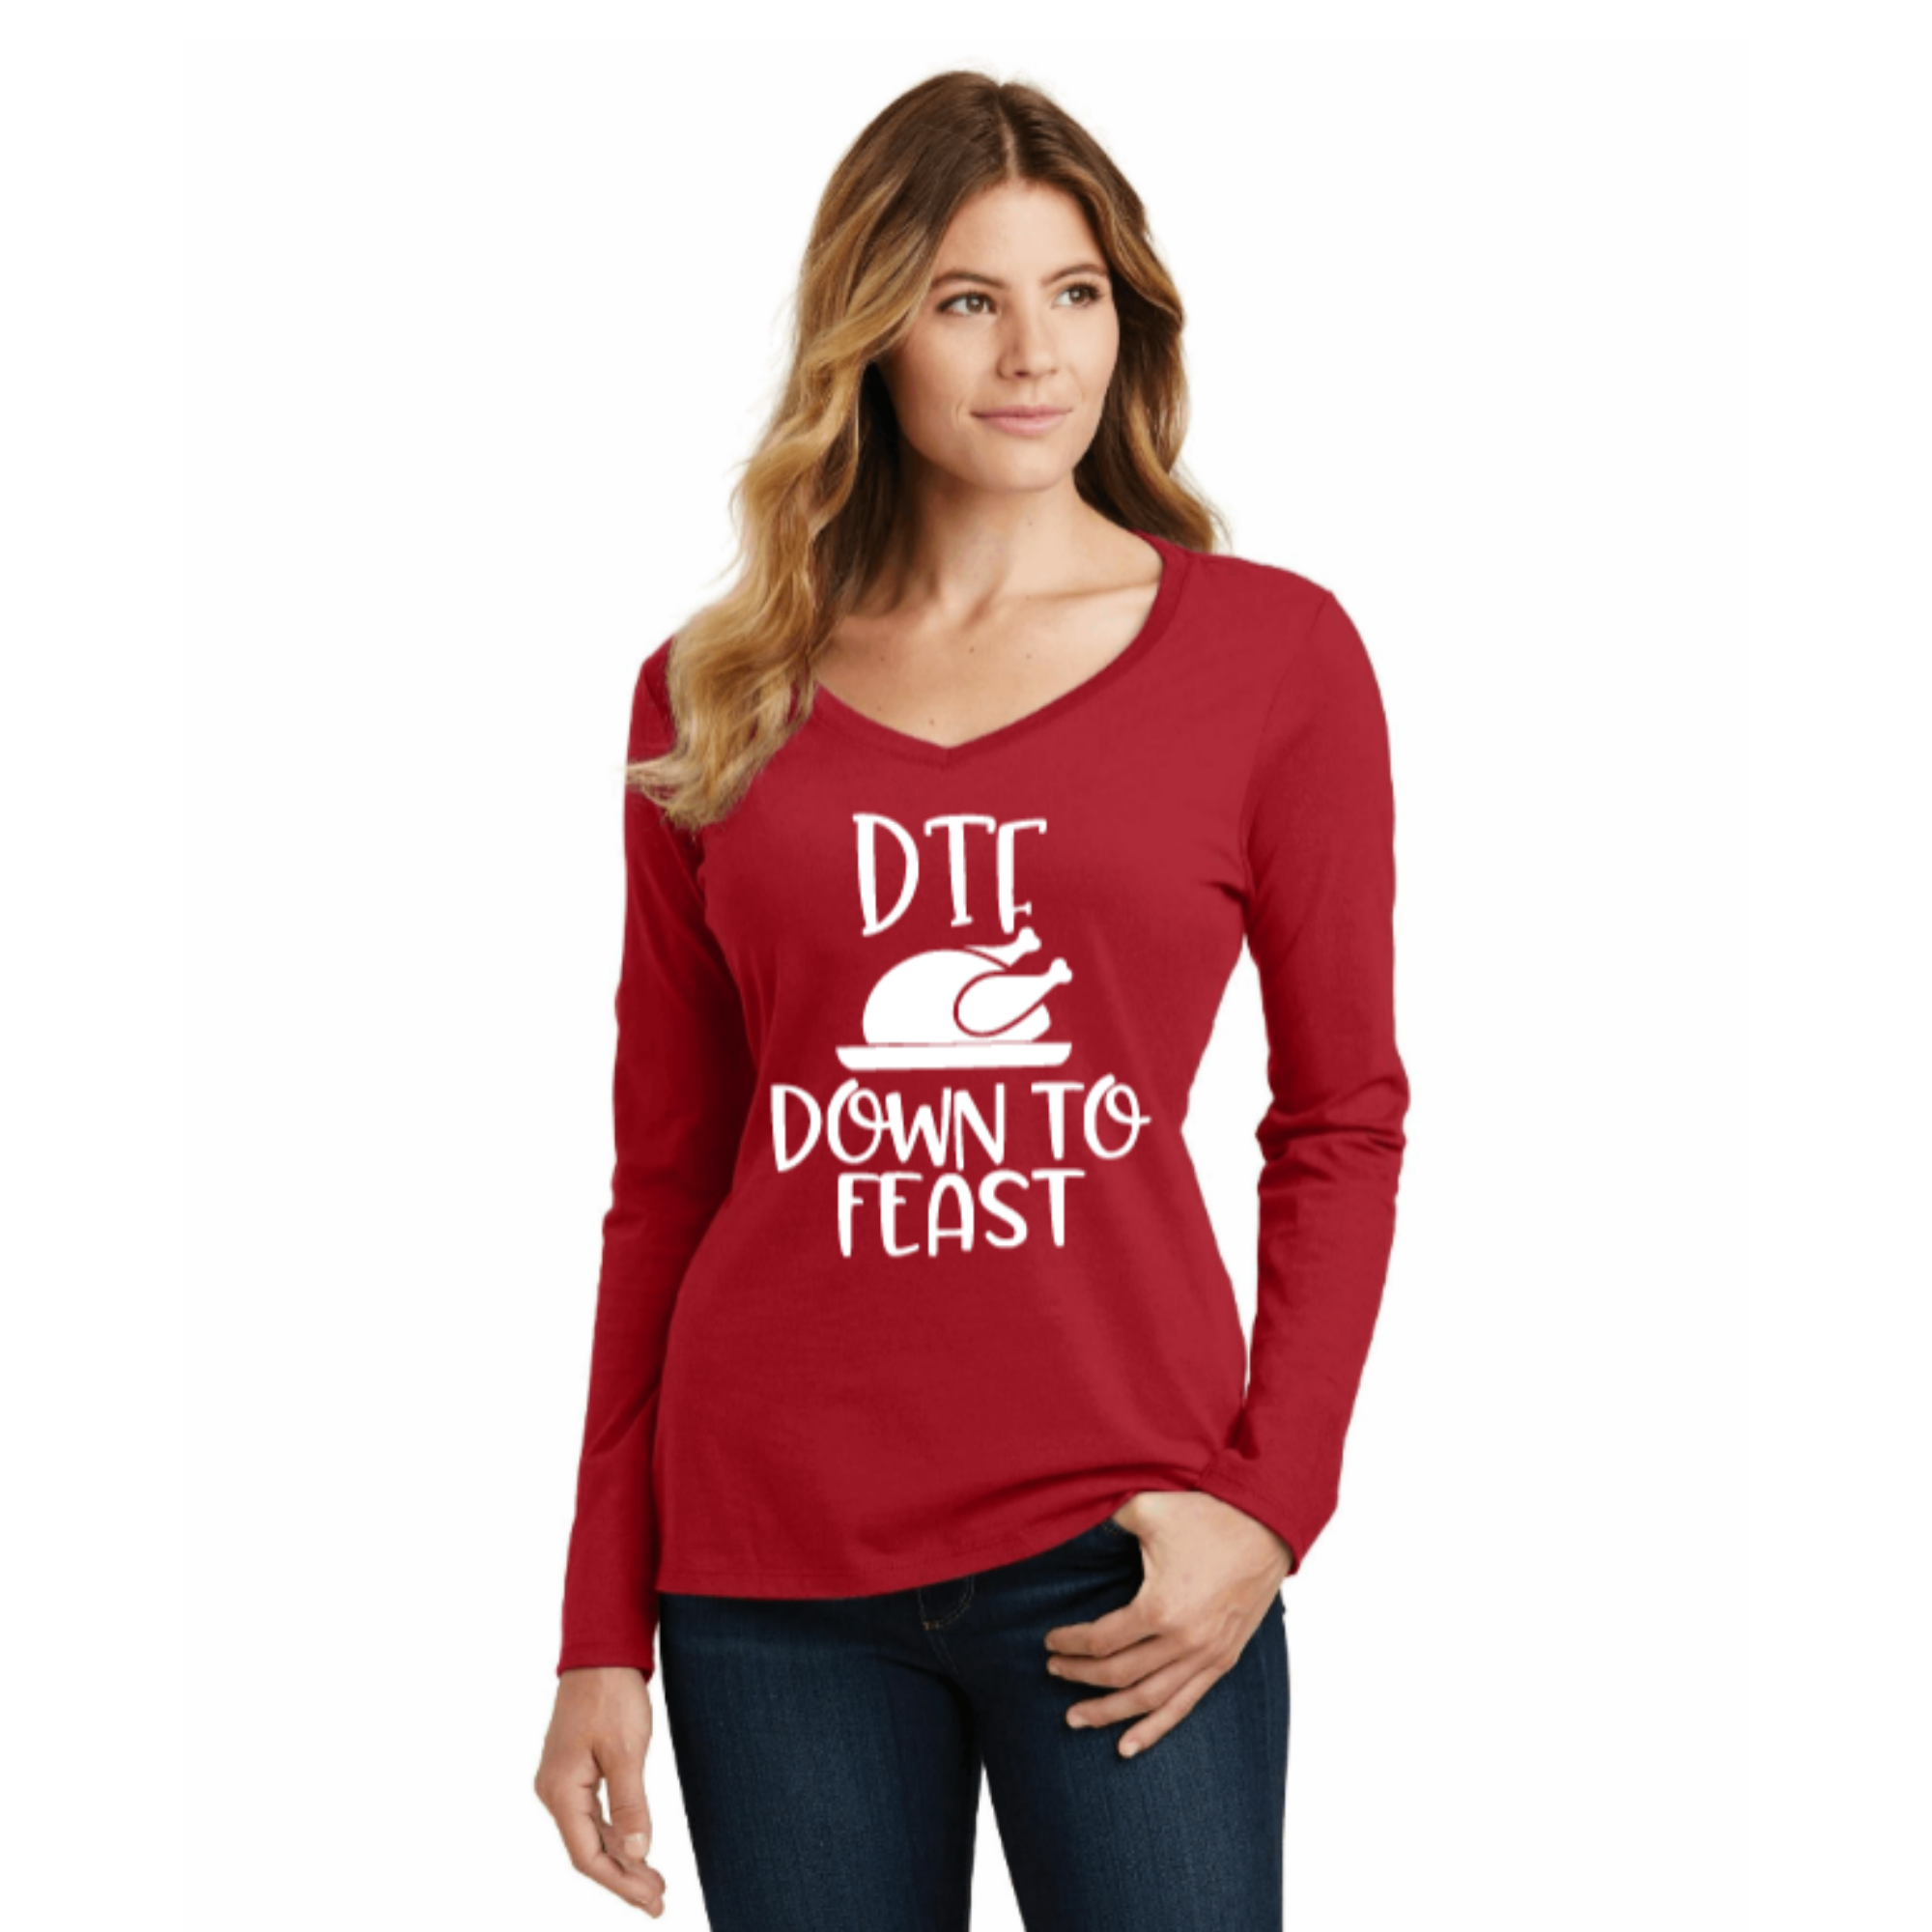 Down to Feast Shirt